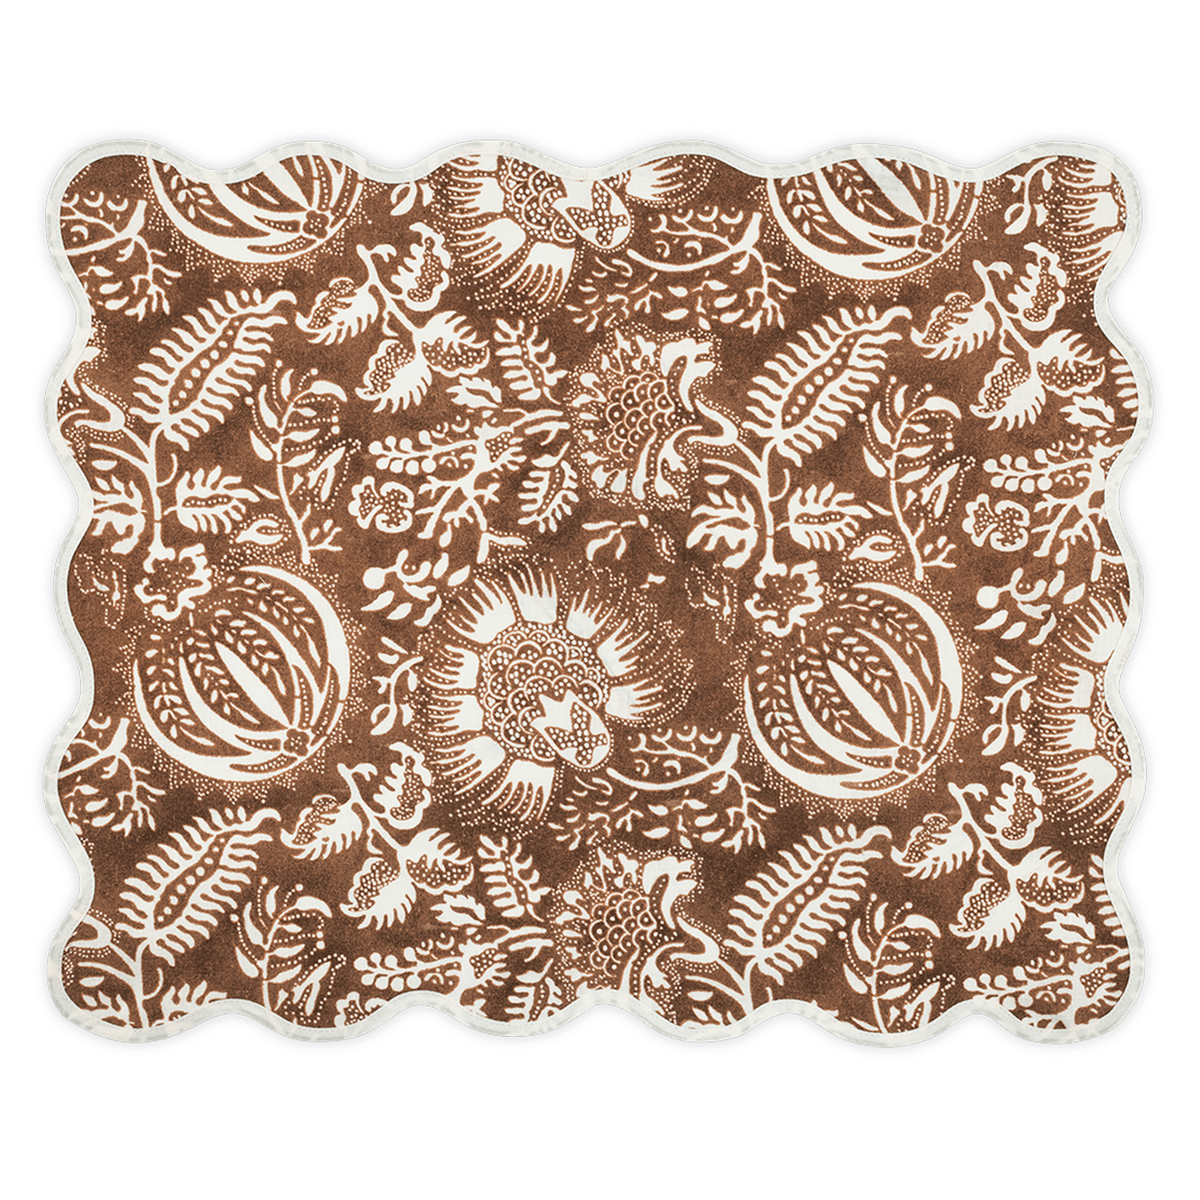 Silo Image of Matouk Granada Table Oblong Placemat in Chestnut Color